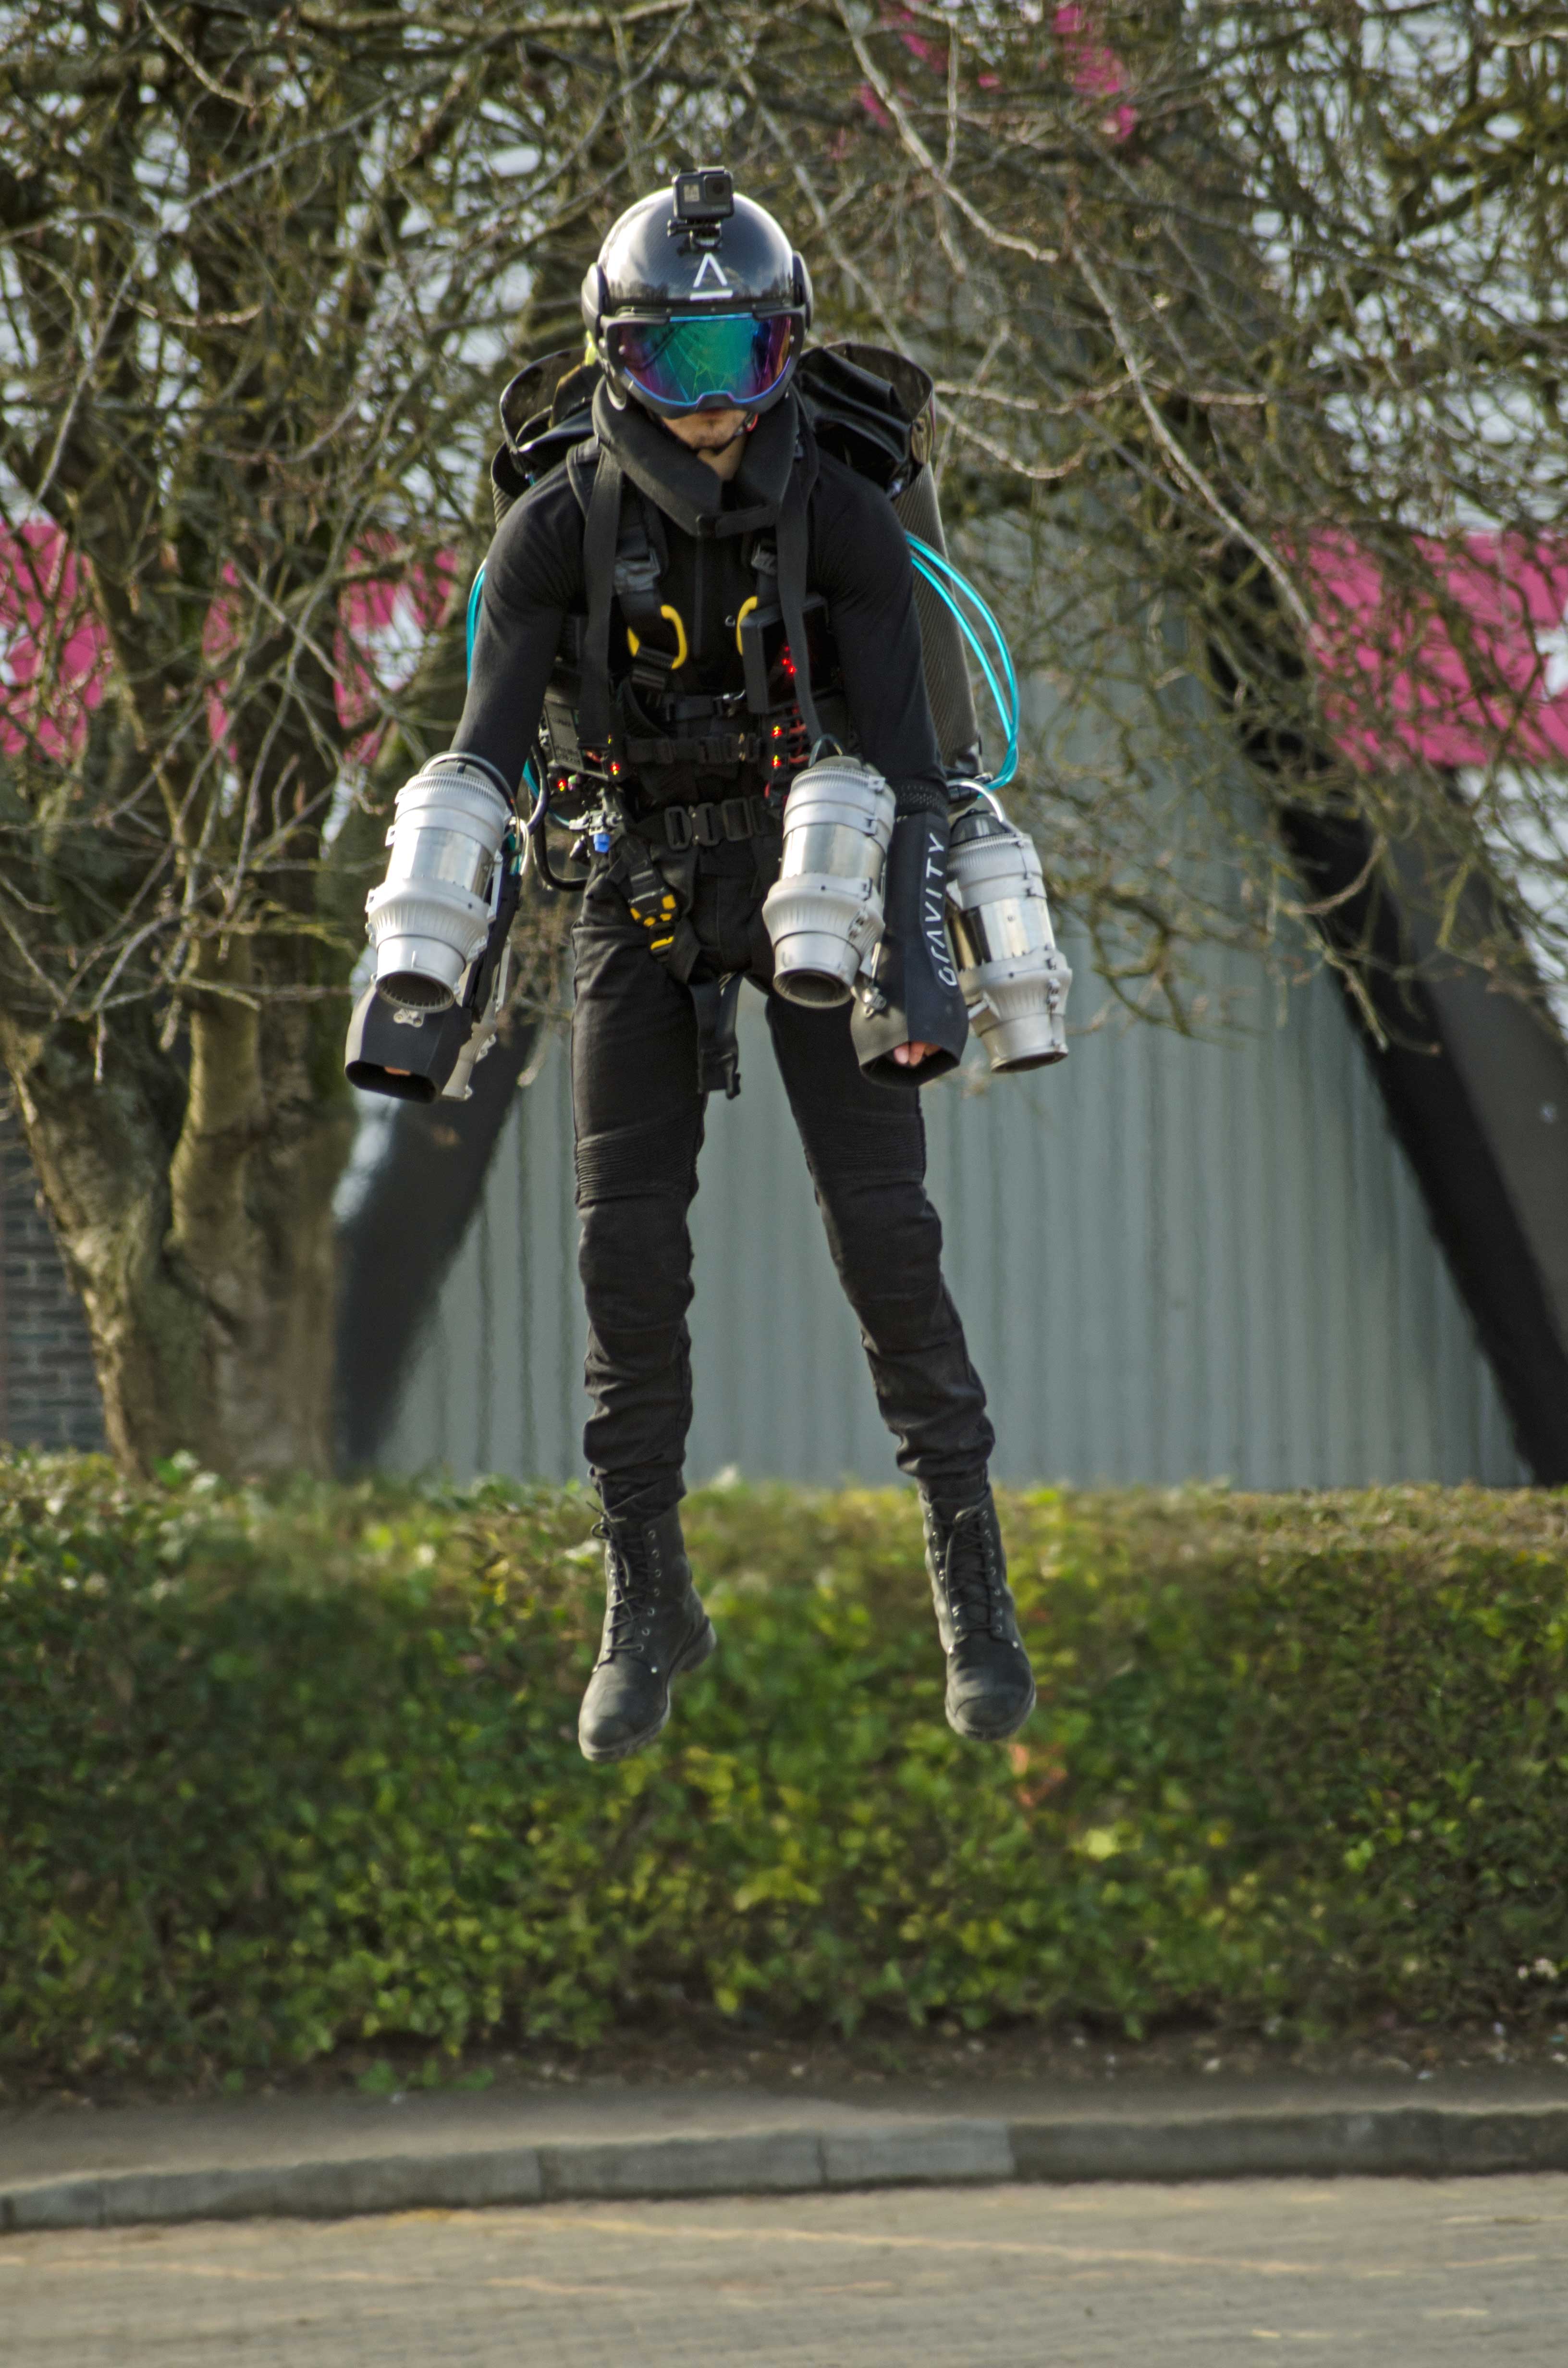 The world’s first patent for a jet suit has gone to a British company